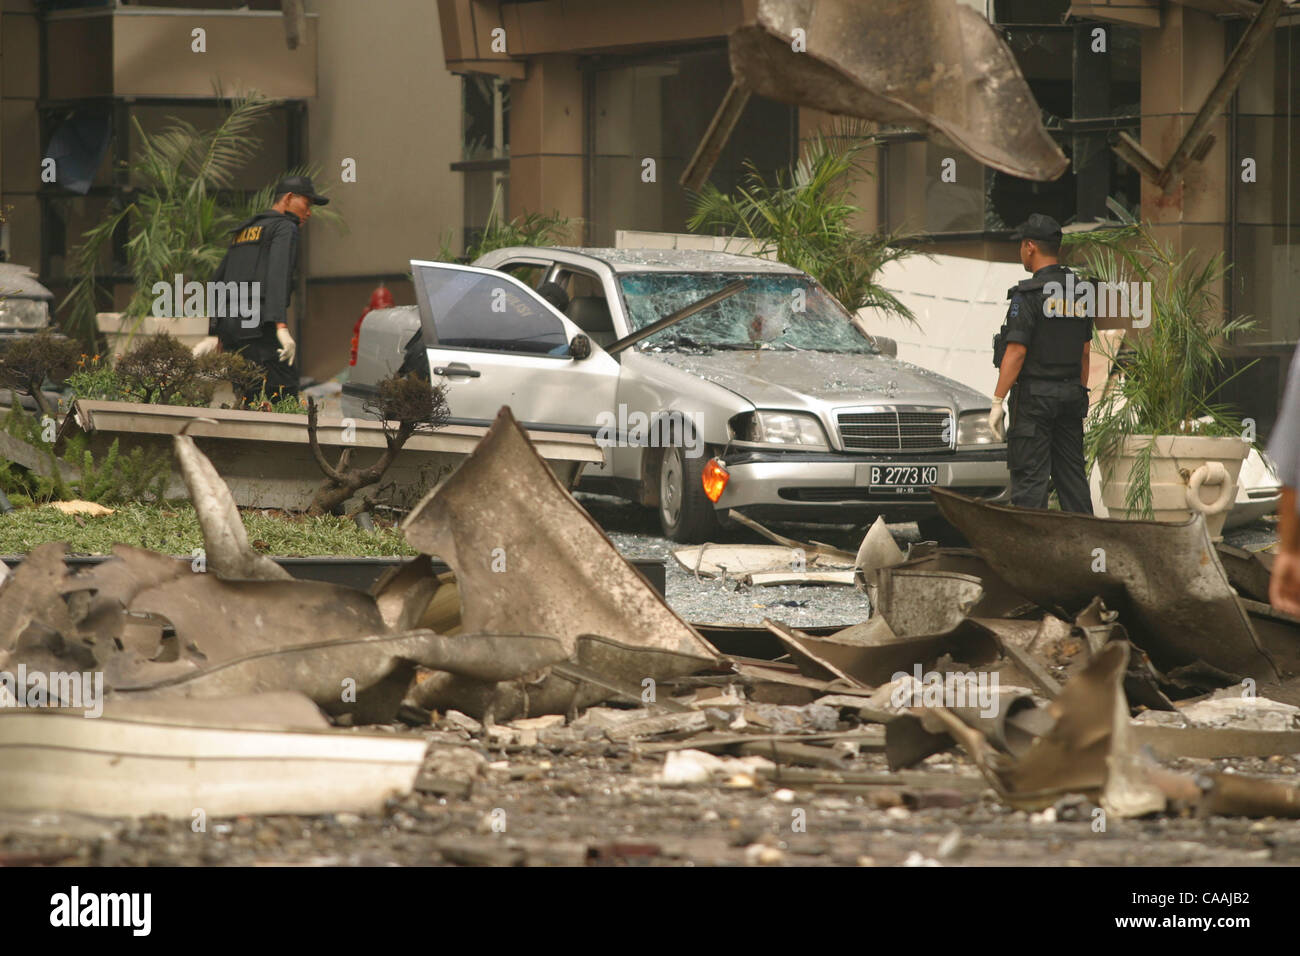 JAKARTA, INDONESIA AUGUST 5, 2003:  Police investigators scrutinize a Mercedes sedan that was parked in the loby area during the explosion at the JW Marriott Hotel.  The explosion damage its lobby, restaurant and nearby buildings.  A car bomb located in front of the loby of Jakarta's JW Marriott hot Stock Photo